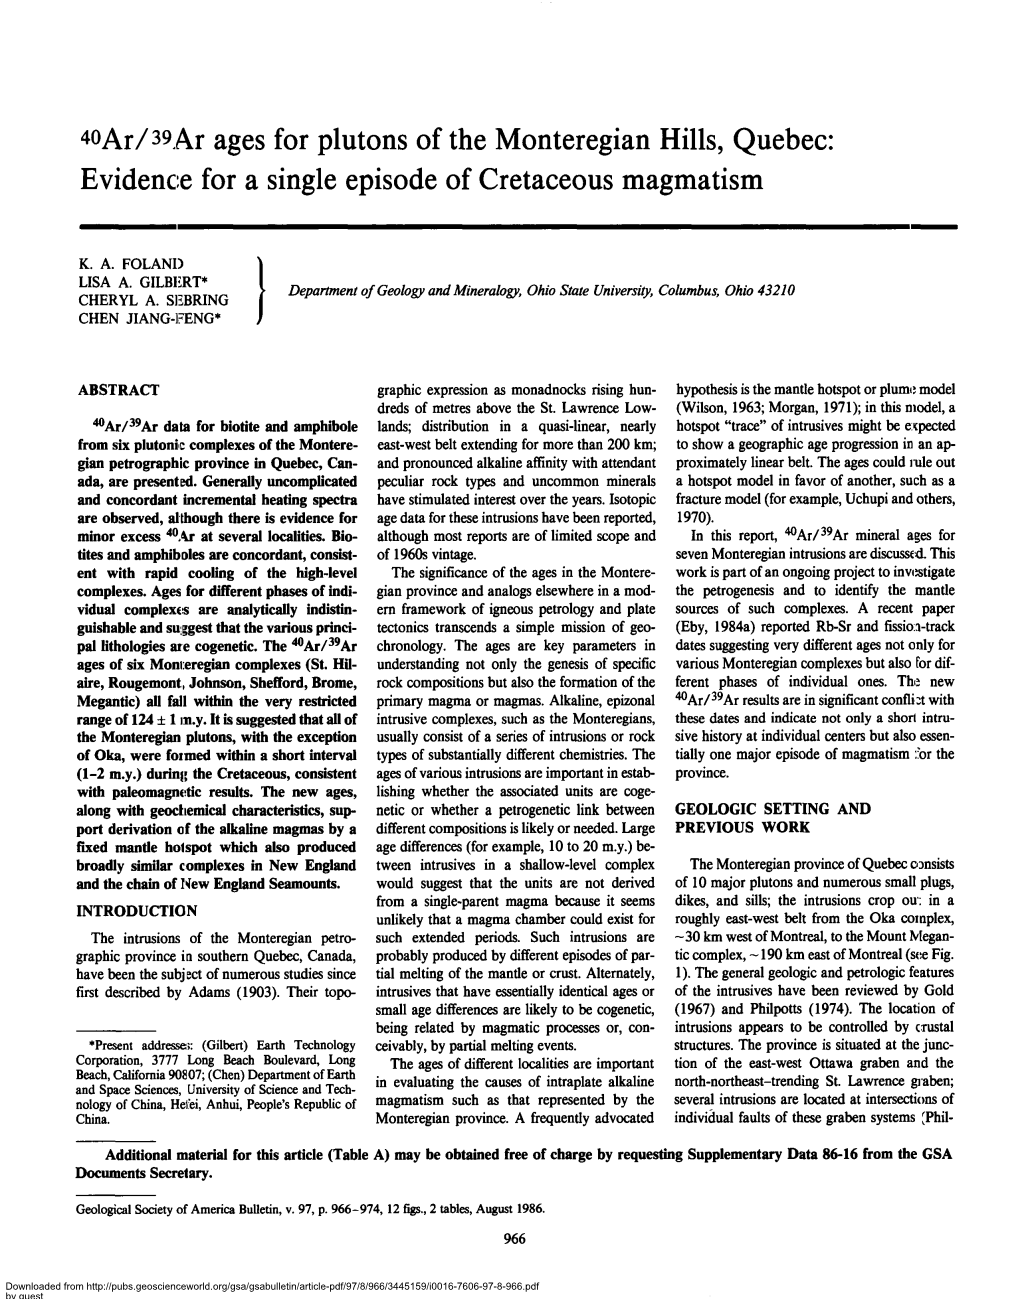 40Ar/39Ar Ages for Plutons of the Monteregian Hills, Quebec: Evidence for a Single Episode of Cretaceous Magmatism